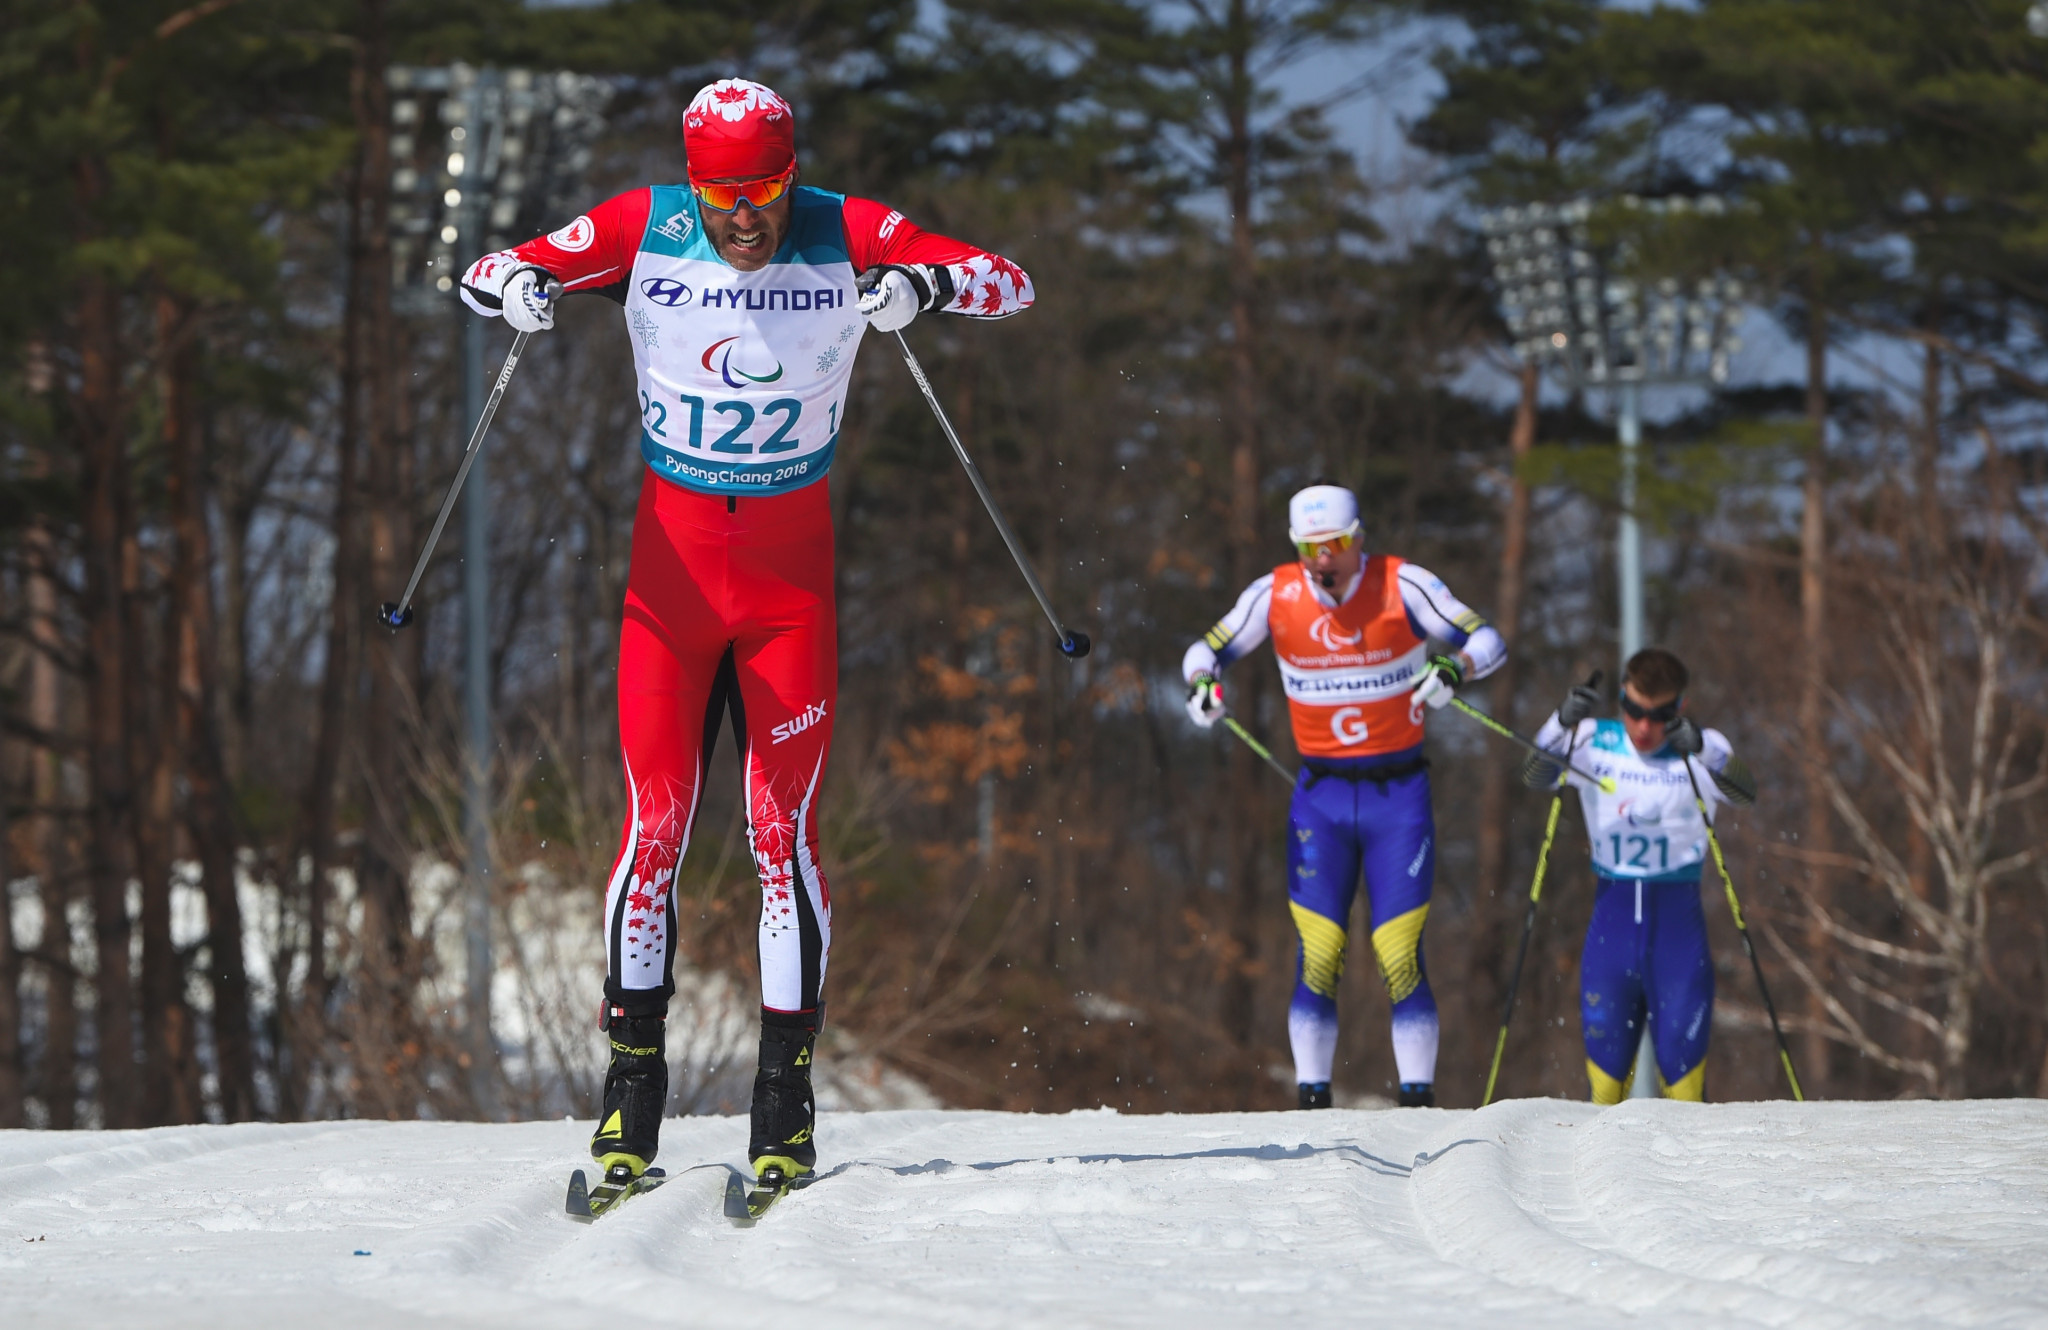 Canadian Para Nordic team to stay at home due to COVID-19 risk prior to Beijing 2022